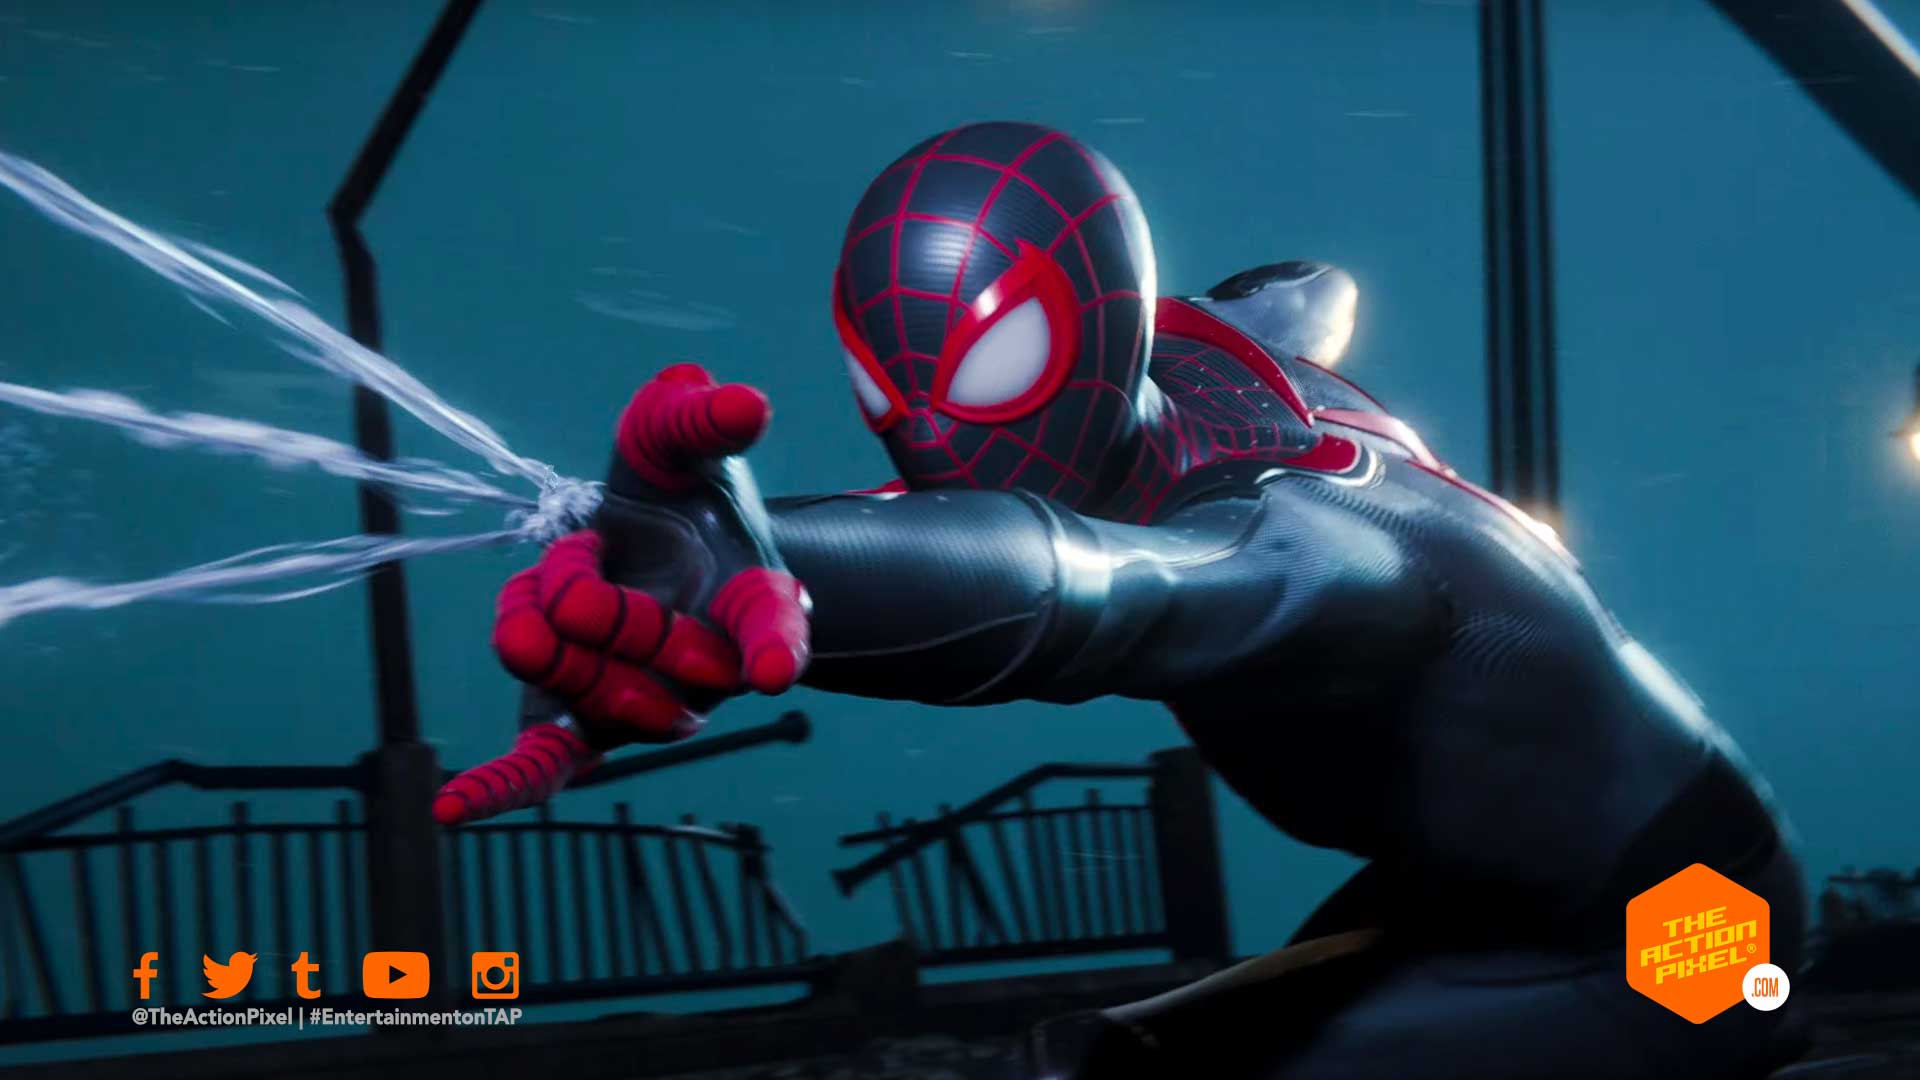 Miles Morales his trial-by-fire in the new “Marvel's Spider-Man: Miles Morales” gameplay demo – The Action Pixel